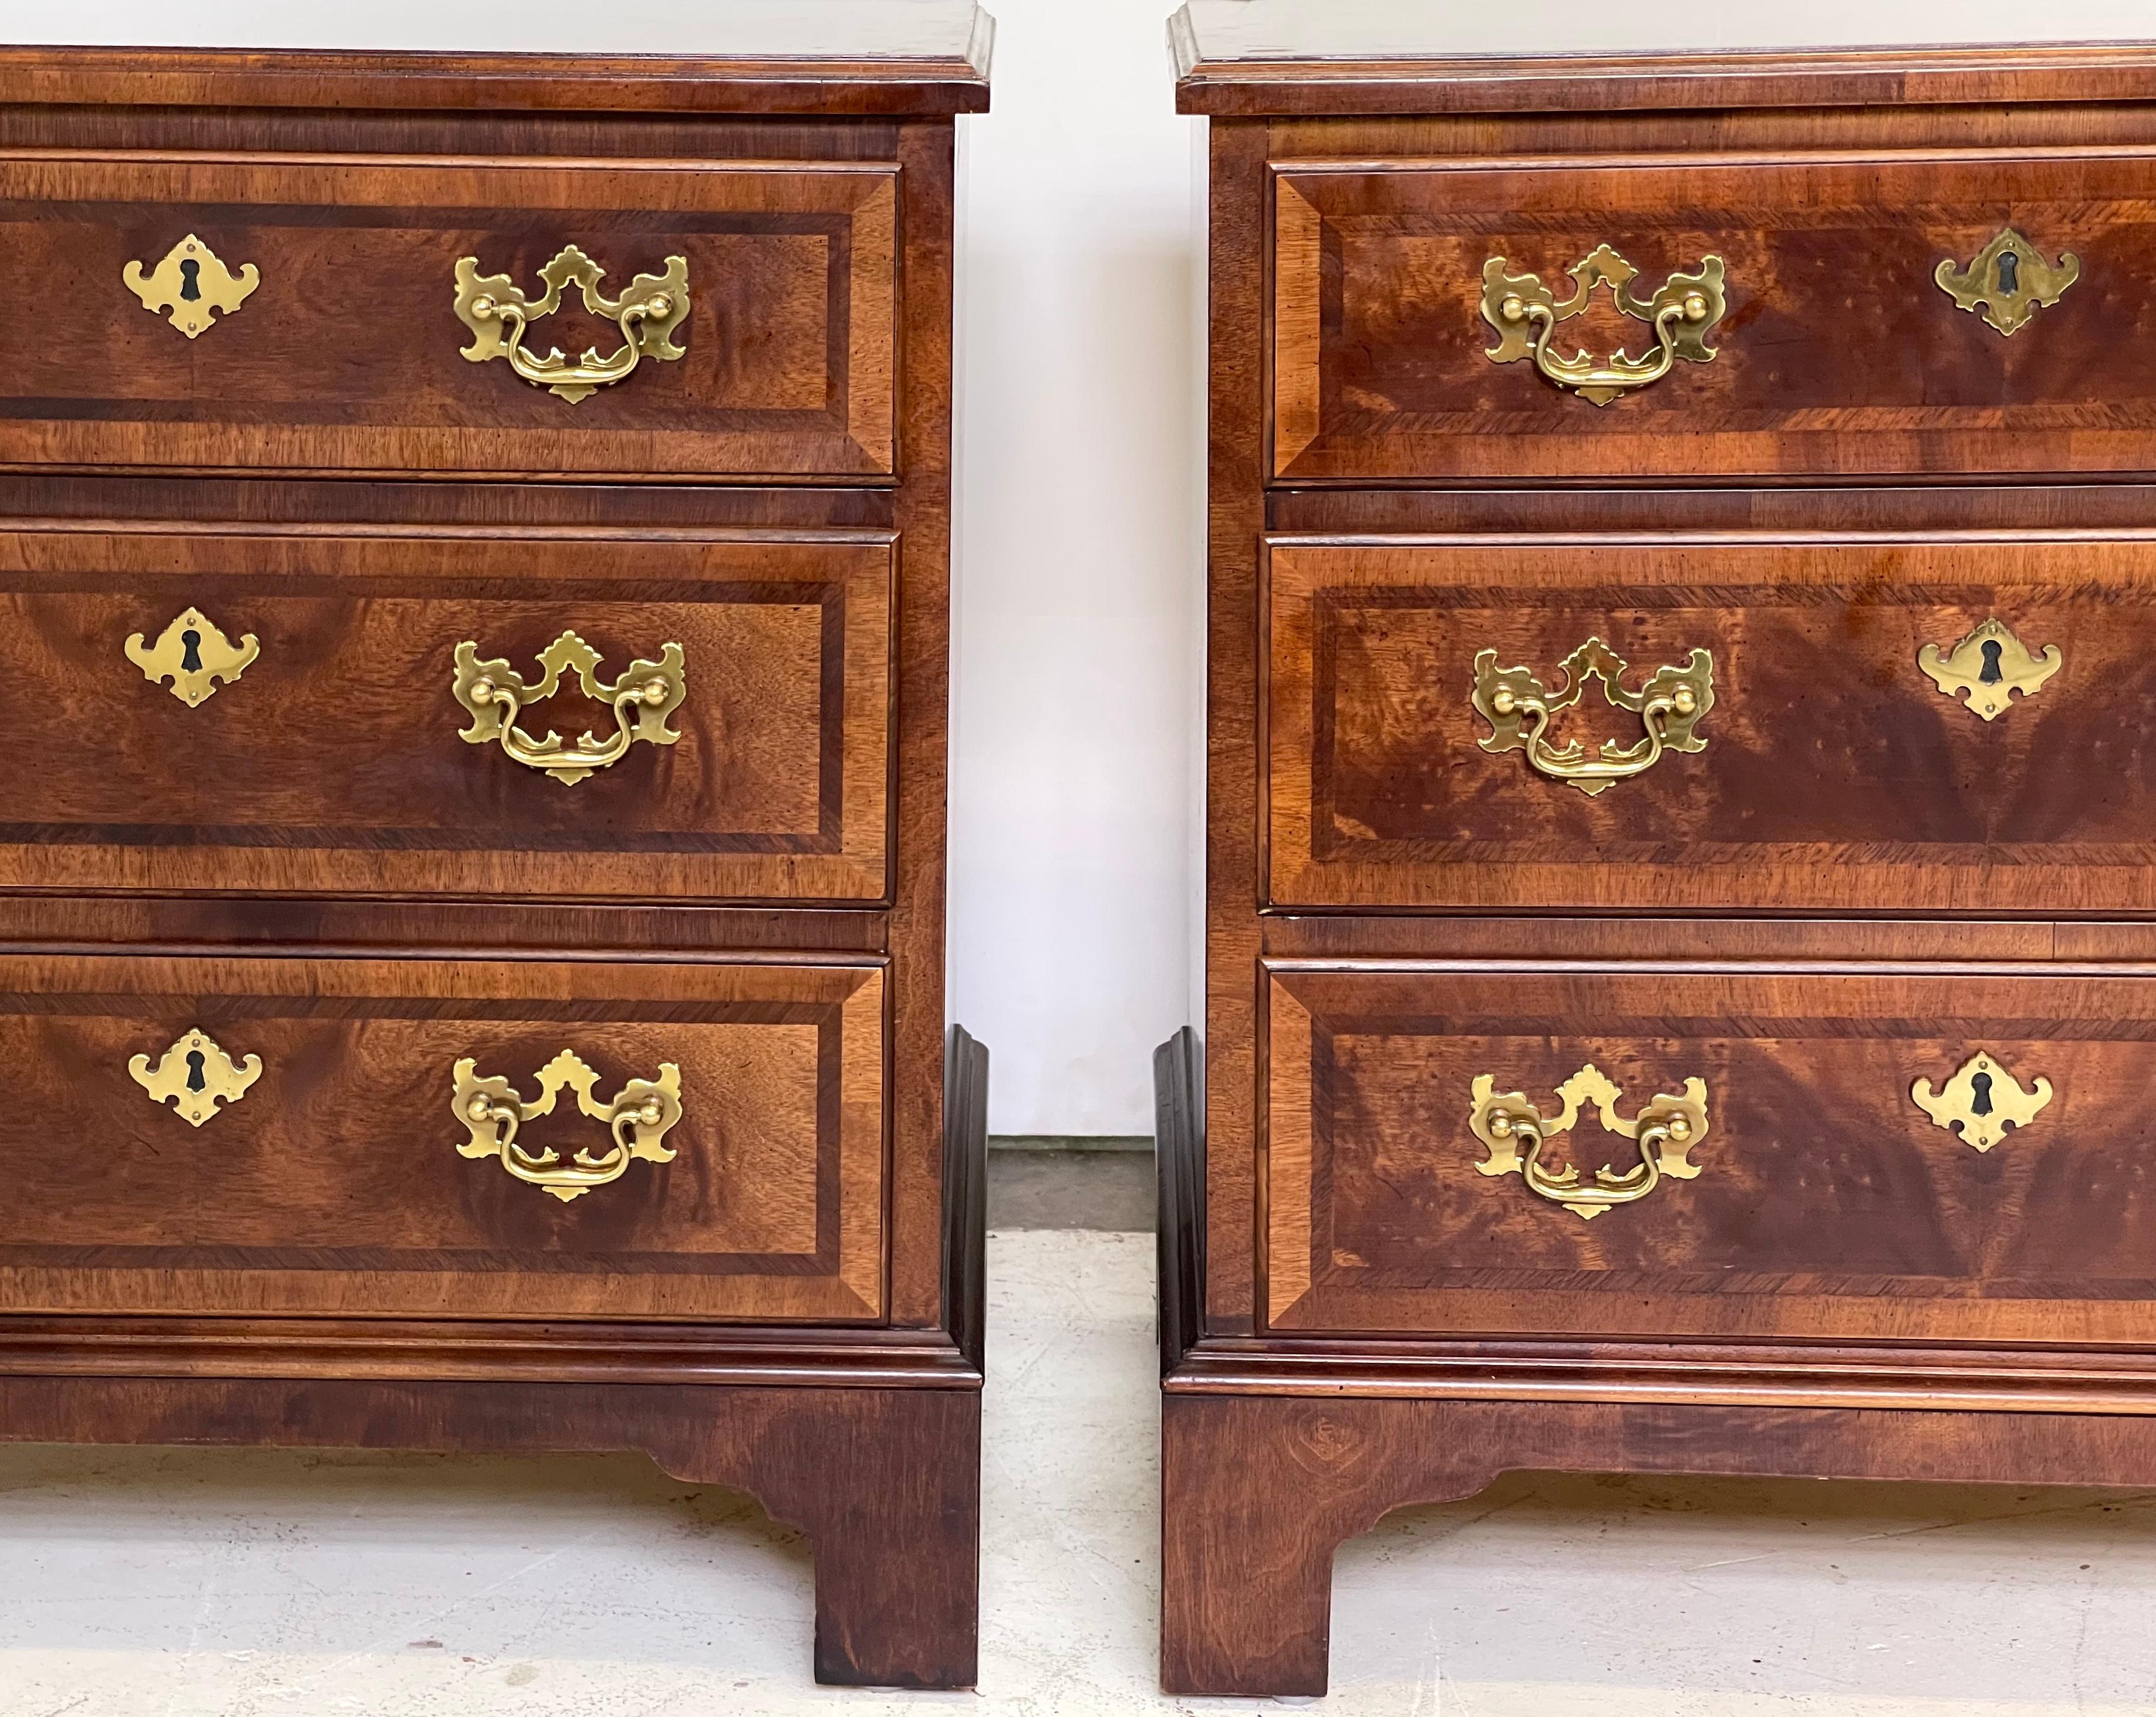 Pair of 20th century burl walnut end tables or nightstands made by Henredon in the style of Queen Anne. Each case holds three drawers with brass back plates, bail handles, and escutcheons. They are raised on bracketed feet.